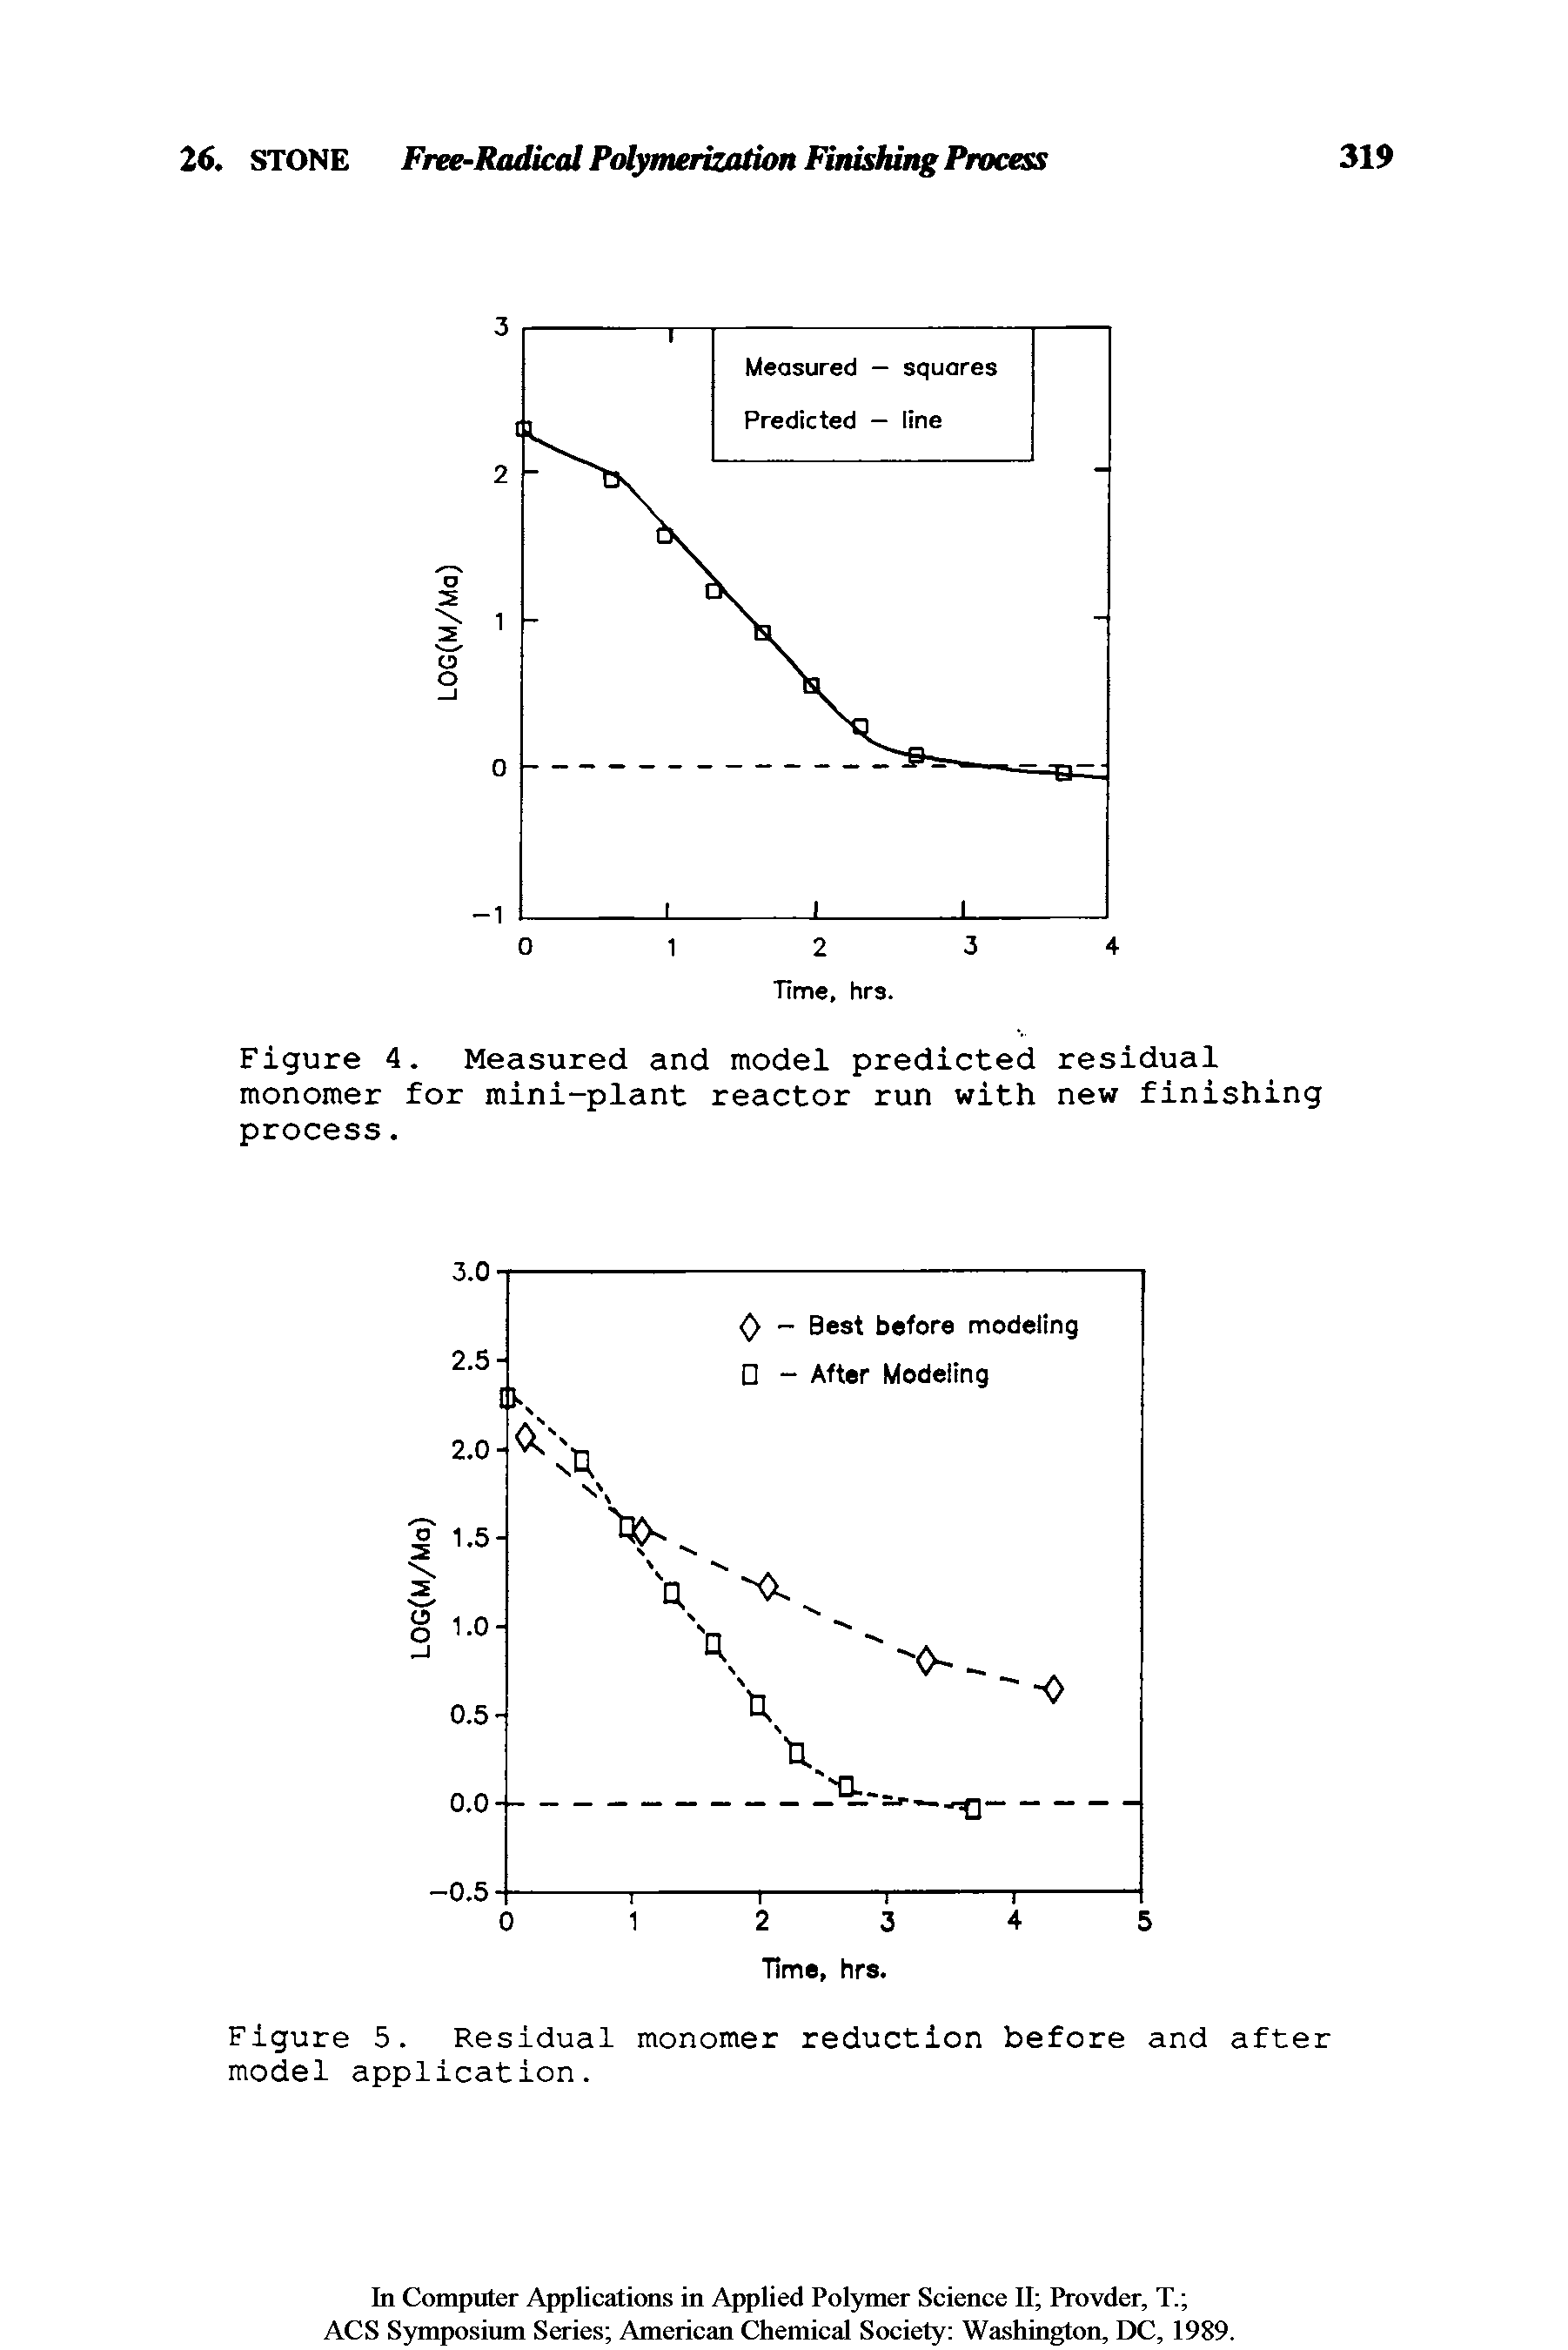 Figure 5. Residual monomer reduction before and after model application.